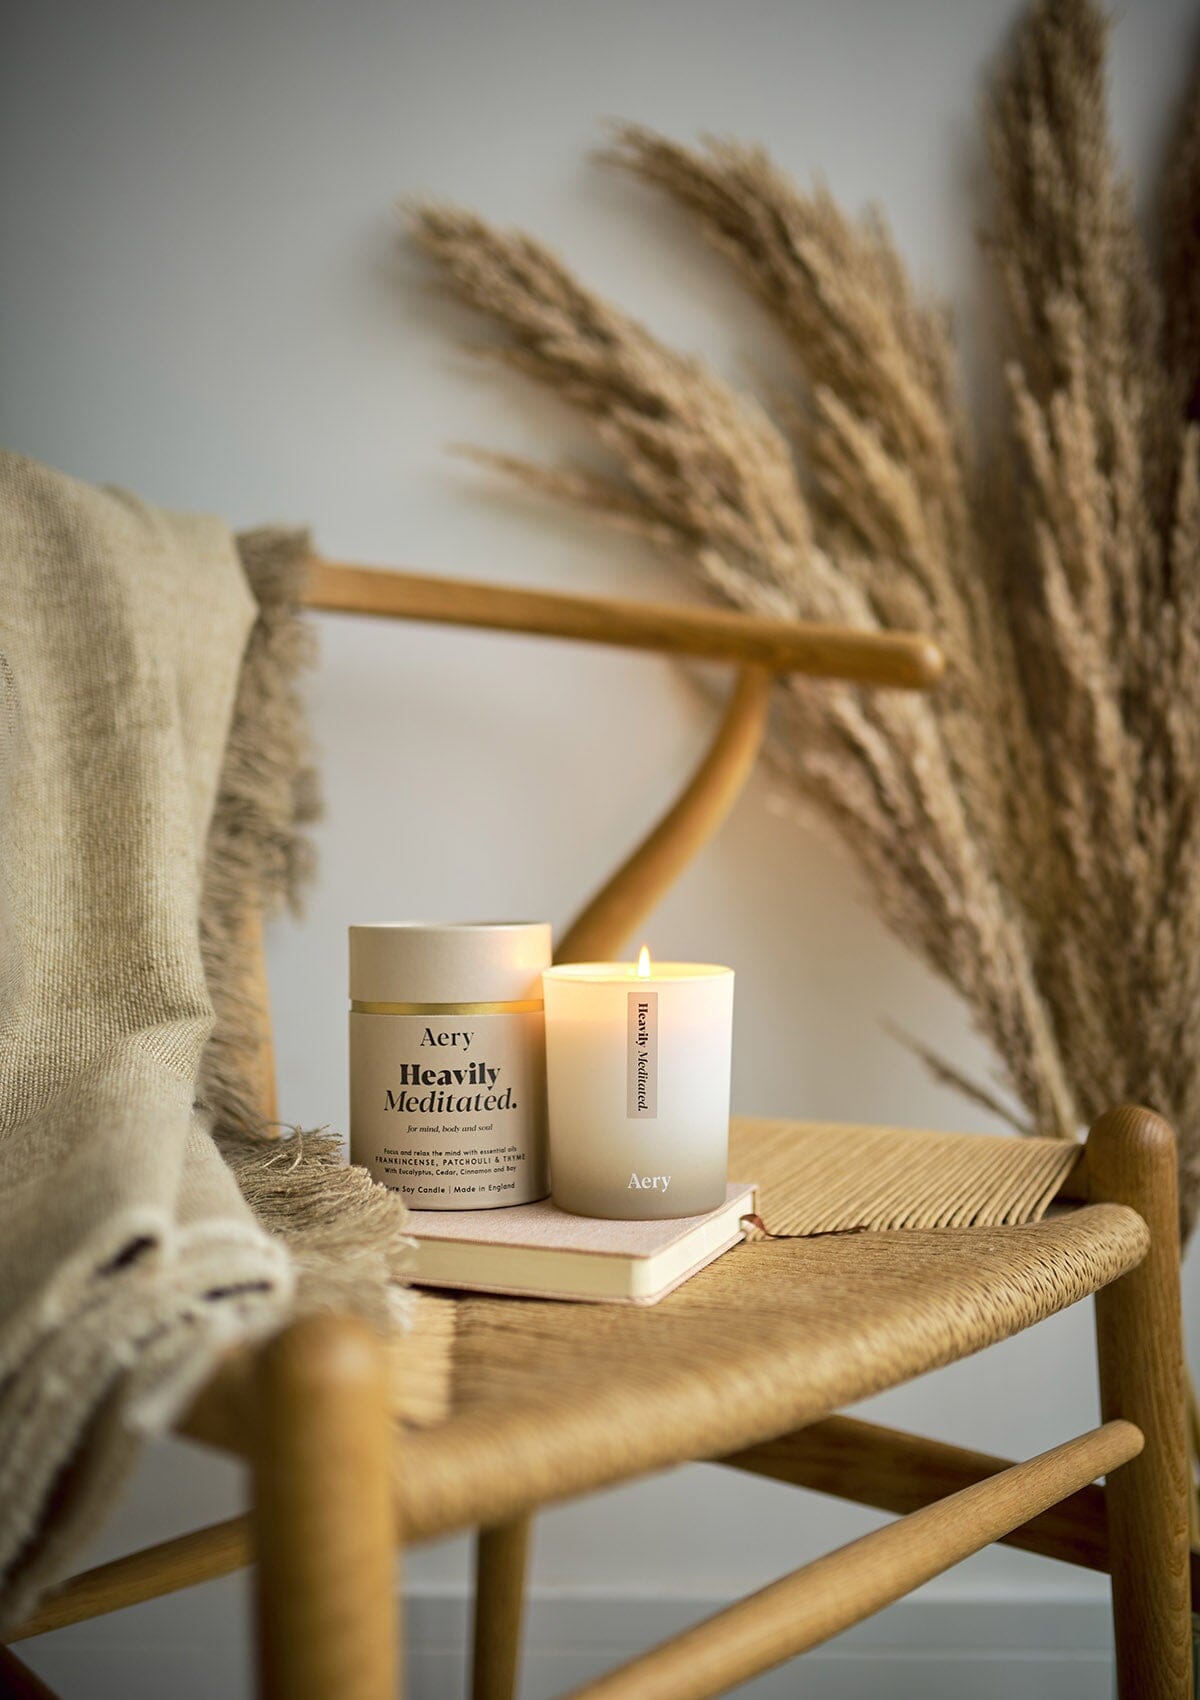 Beige Heavily Meditated candle displayed next to product packaging by Aery placed on book and wicker chair 